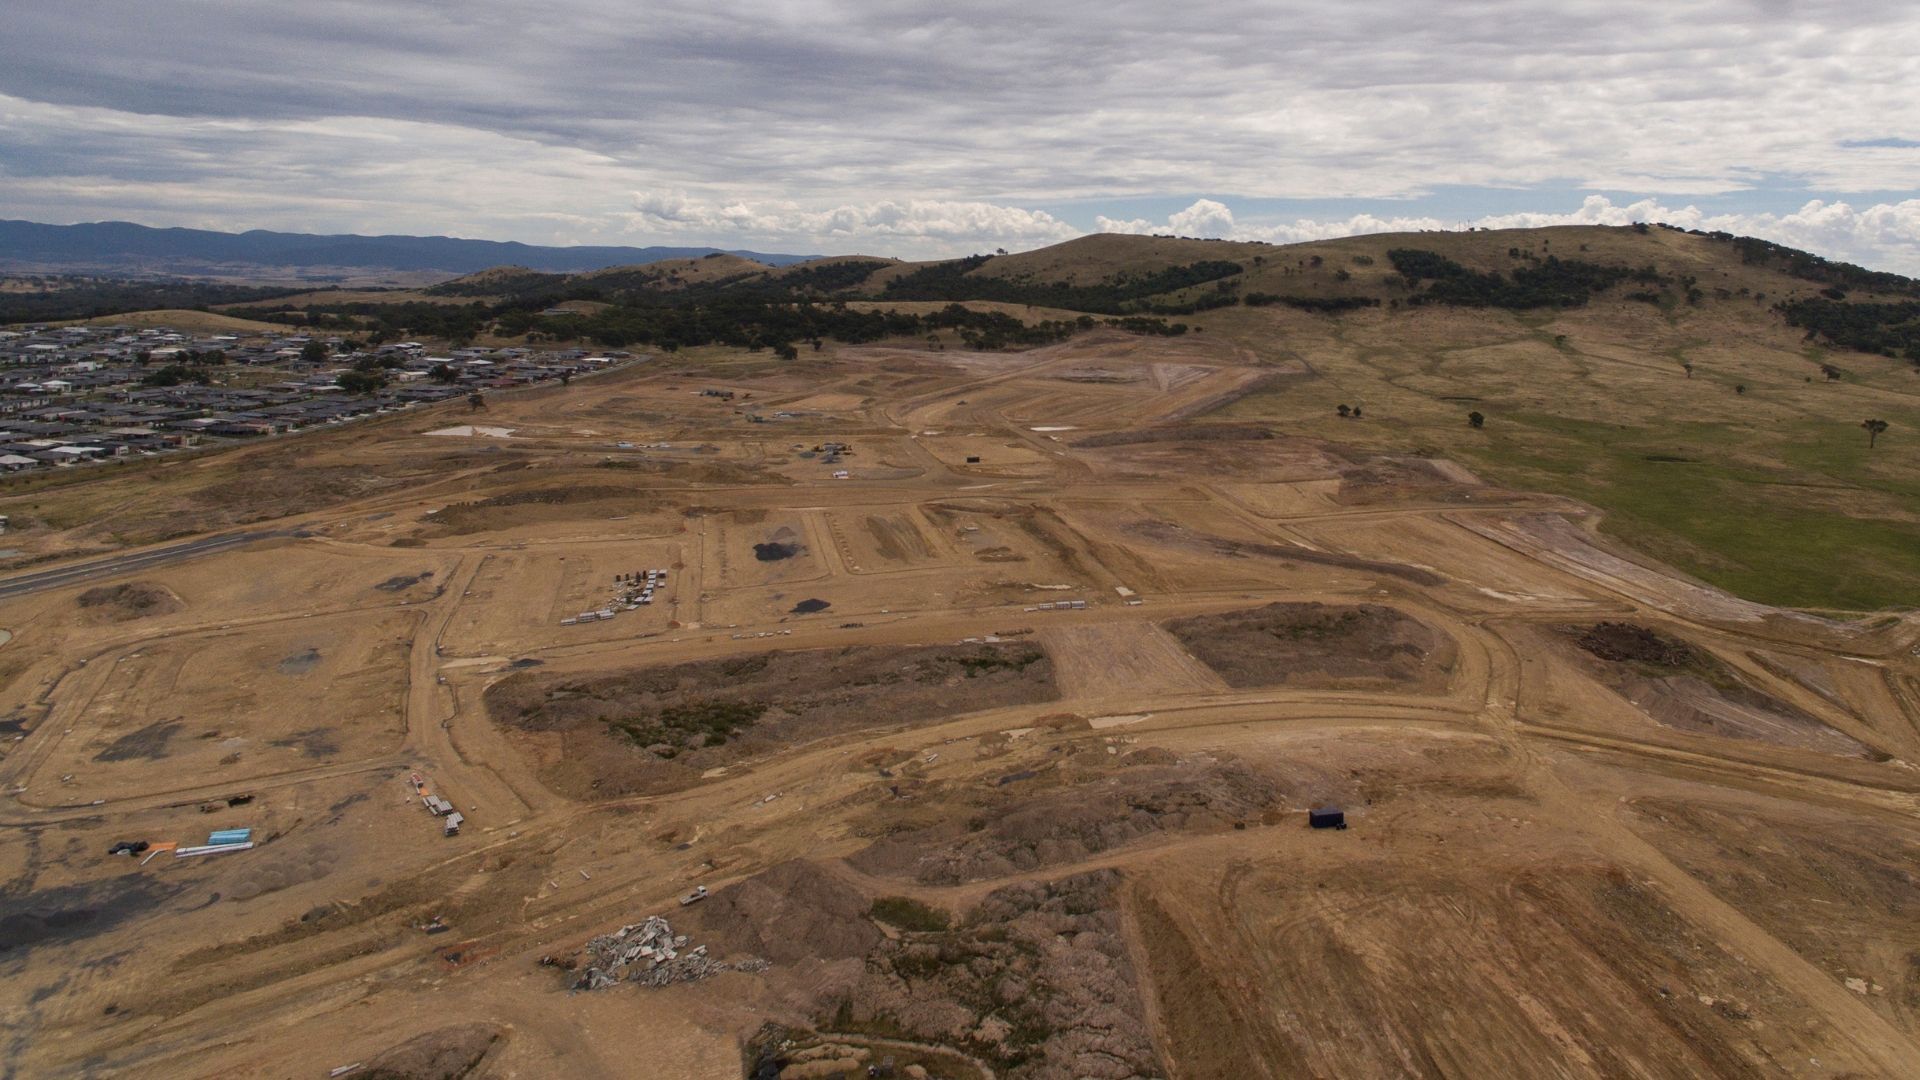 A new land development project viewed from a drone photography shot